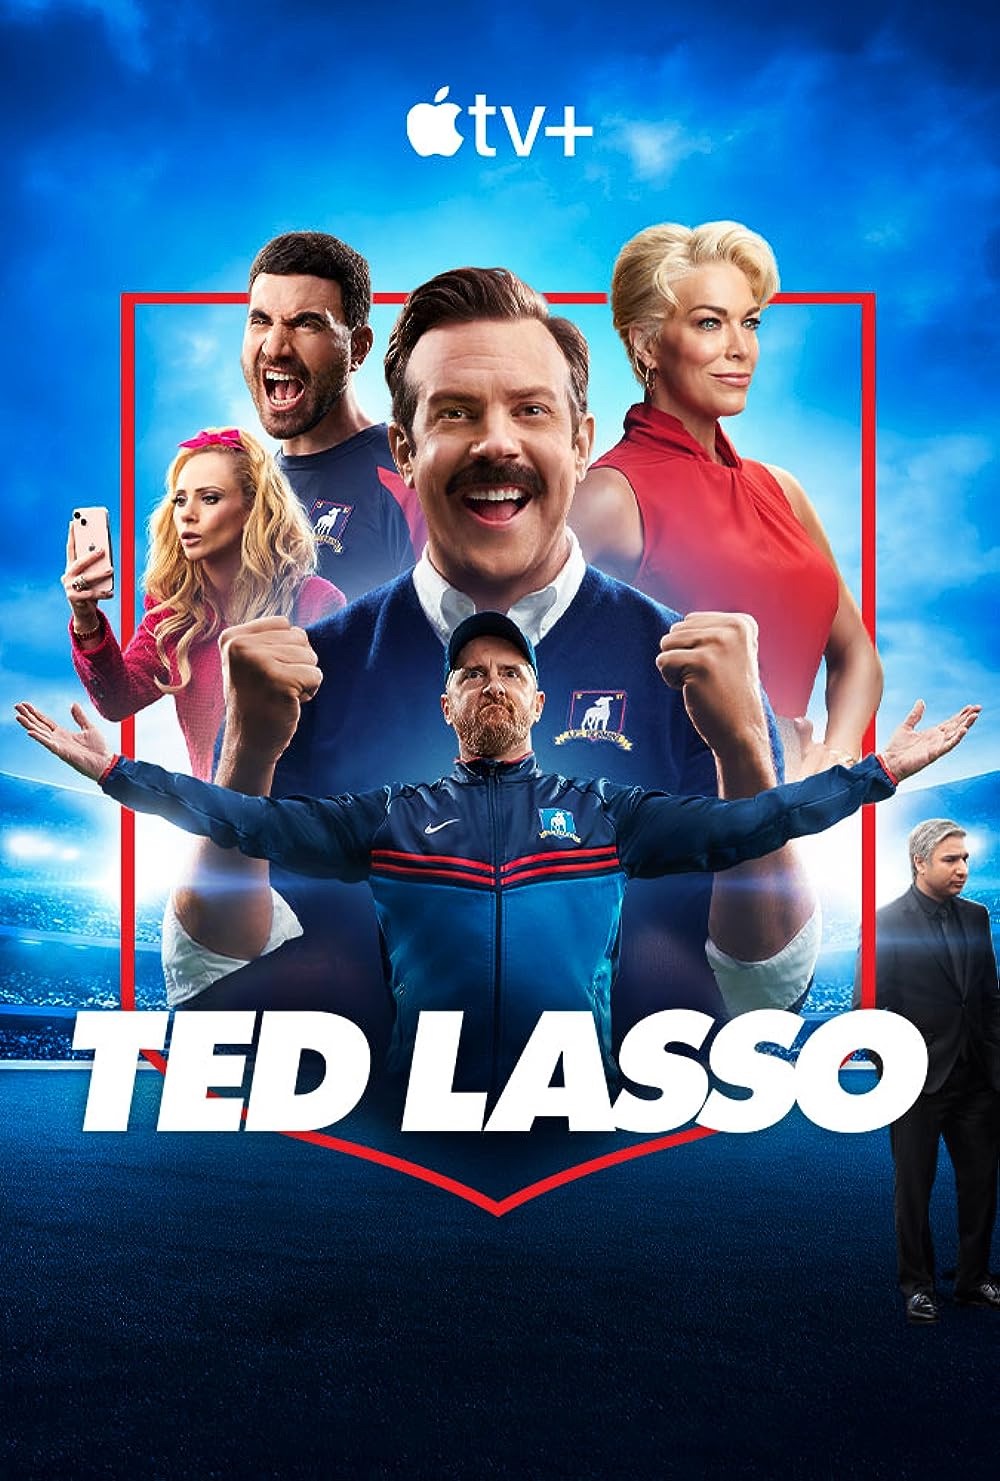 **Ted Lasso** succeeded in making me cry from laughter as well as profound emotion. A+